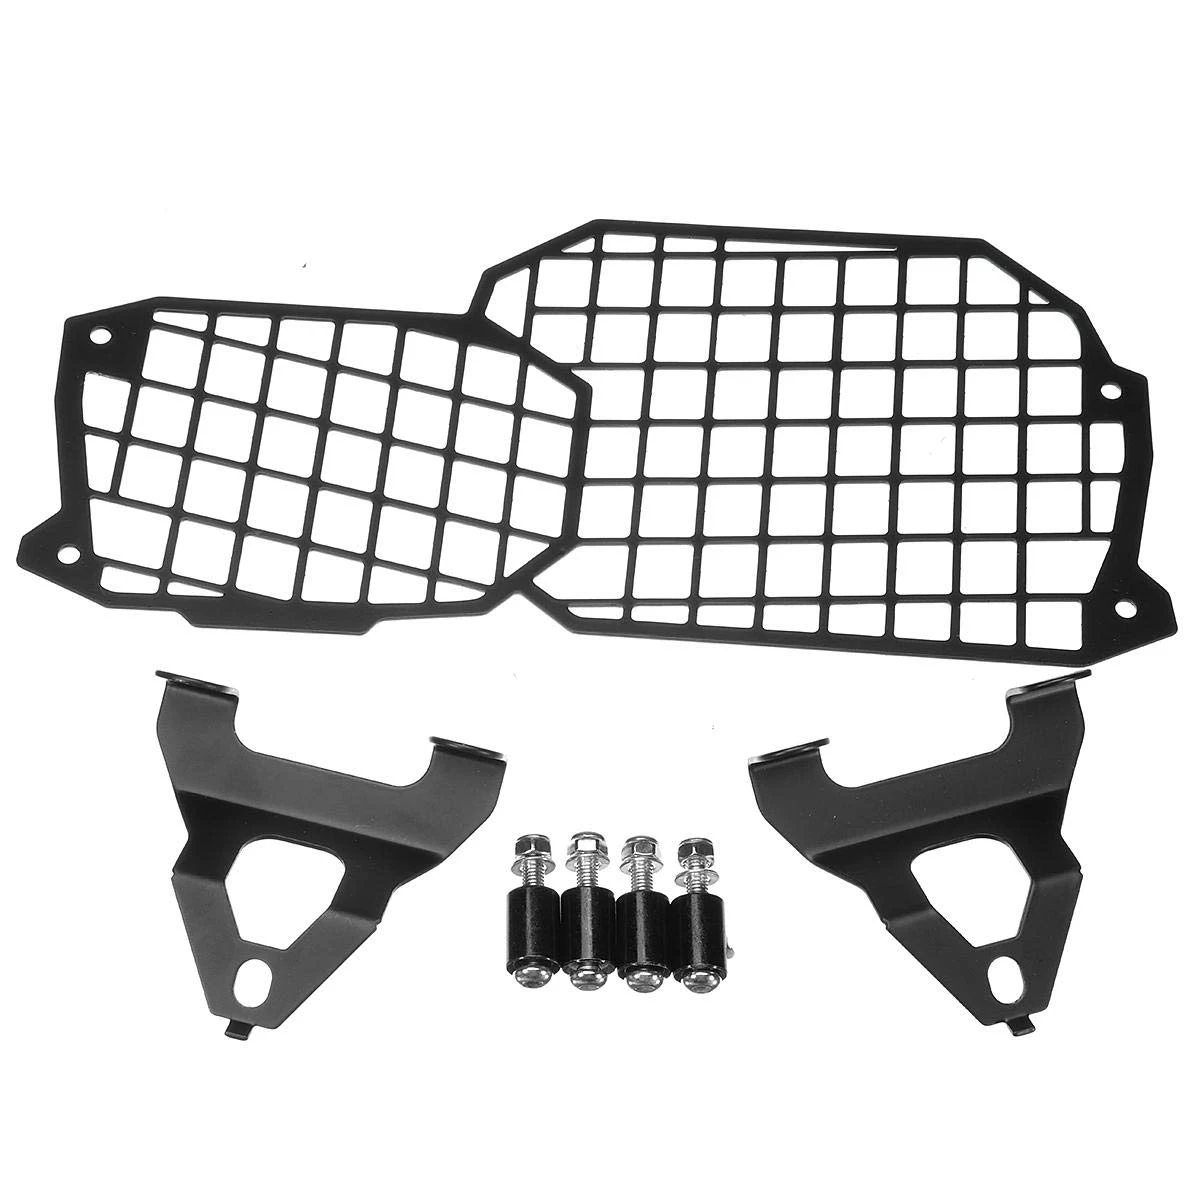 Details about  / Motorcycle Headlight Lamp Grill Protector Guard For BMW F650GS F700GS F800GS